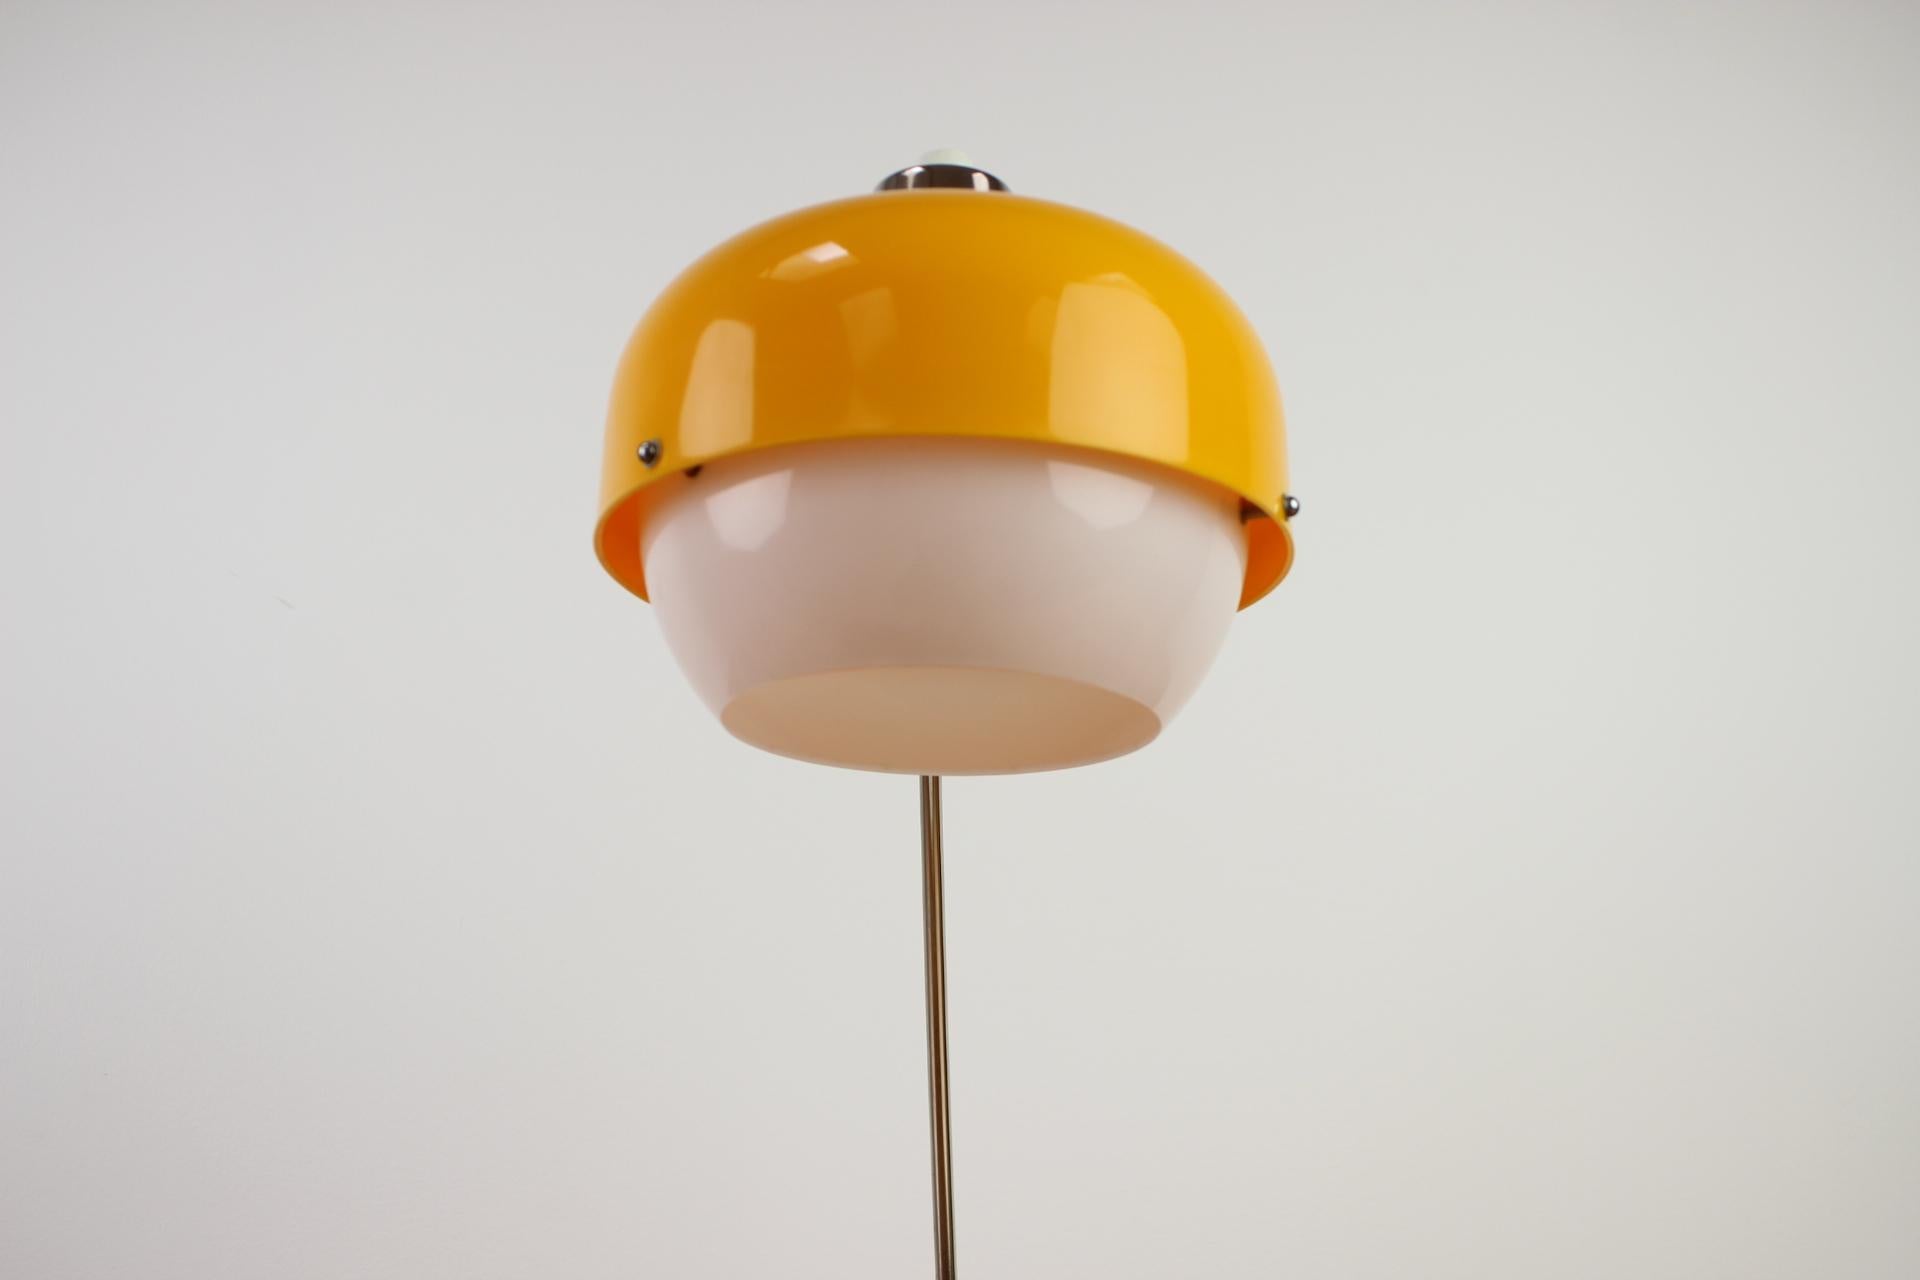 Design Table Lamp in Style of Guzzini, 1970's For Sale 2